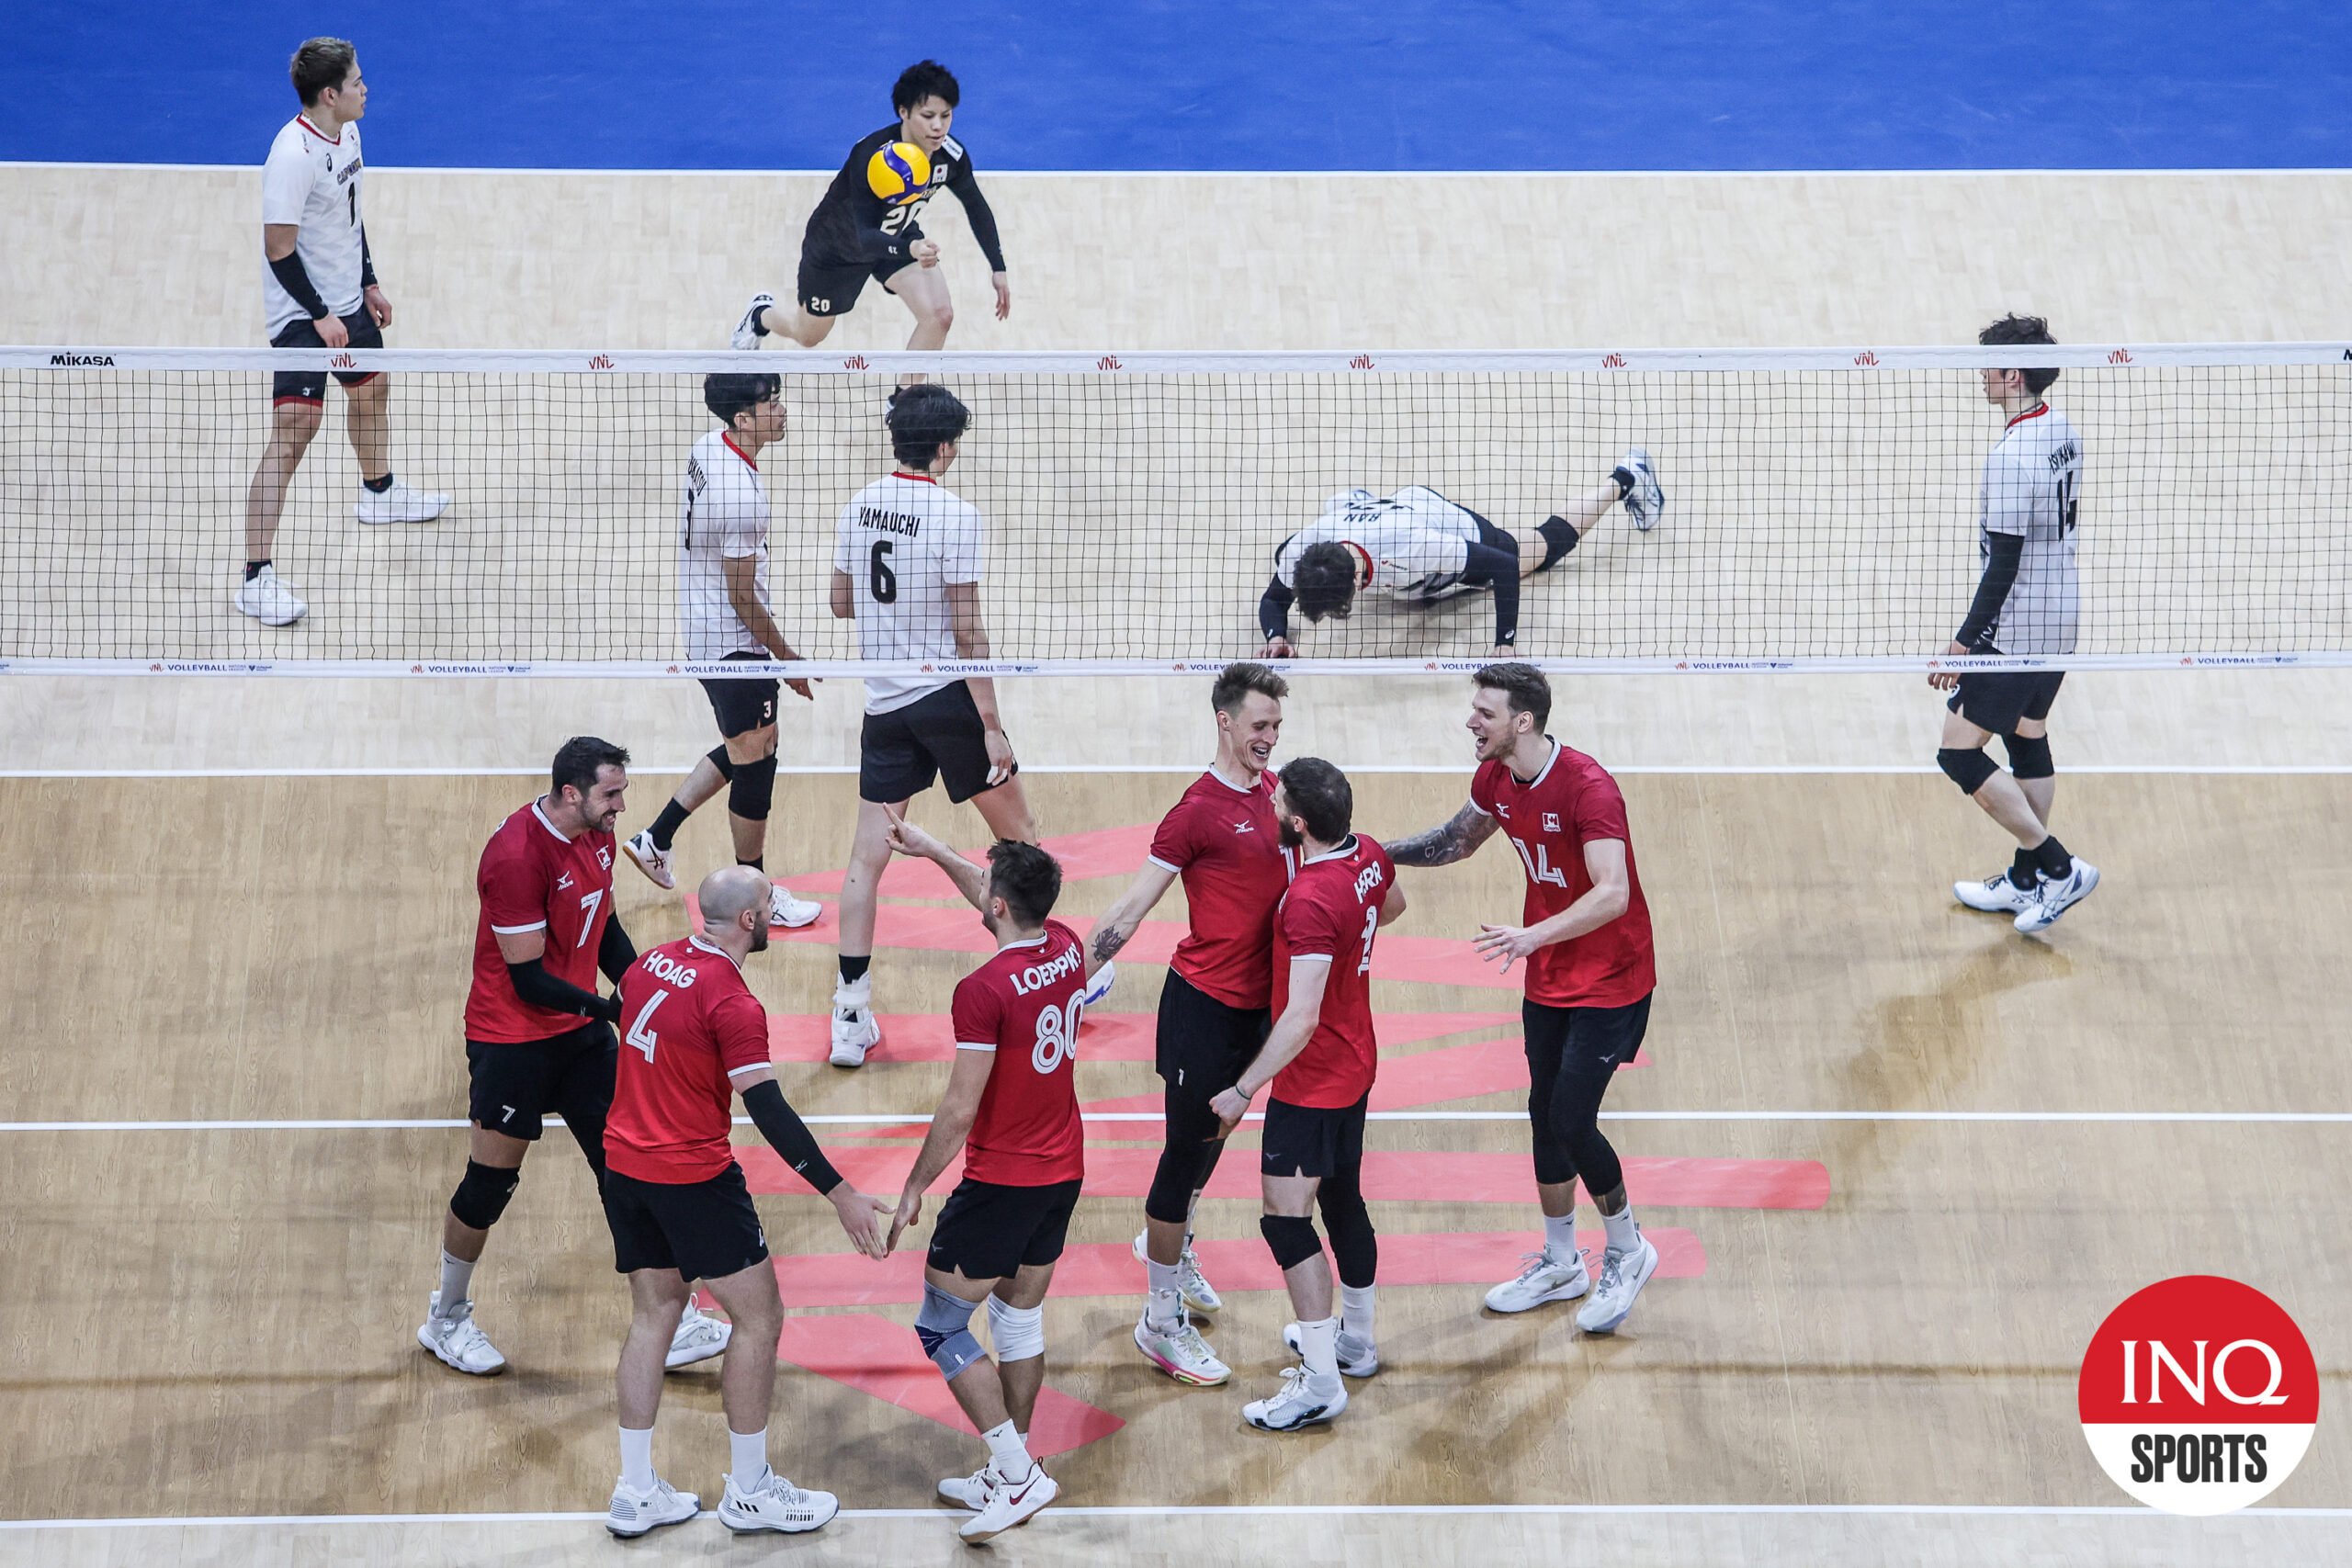 Canada celebrates a point against Japan in the VNL Week 3 match in Manila, Philippines.